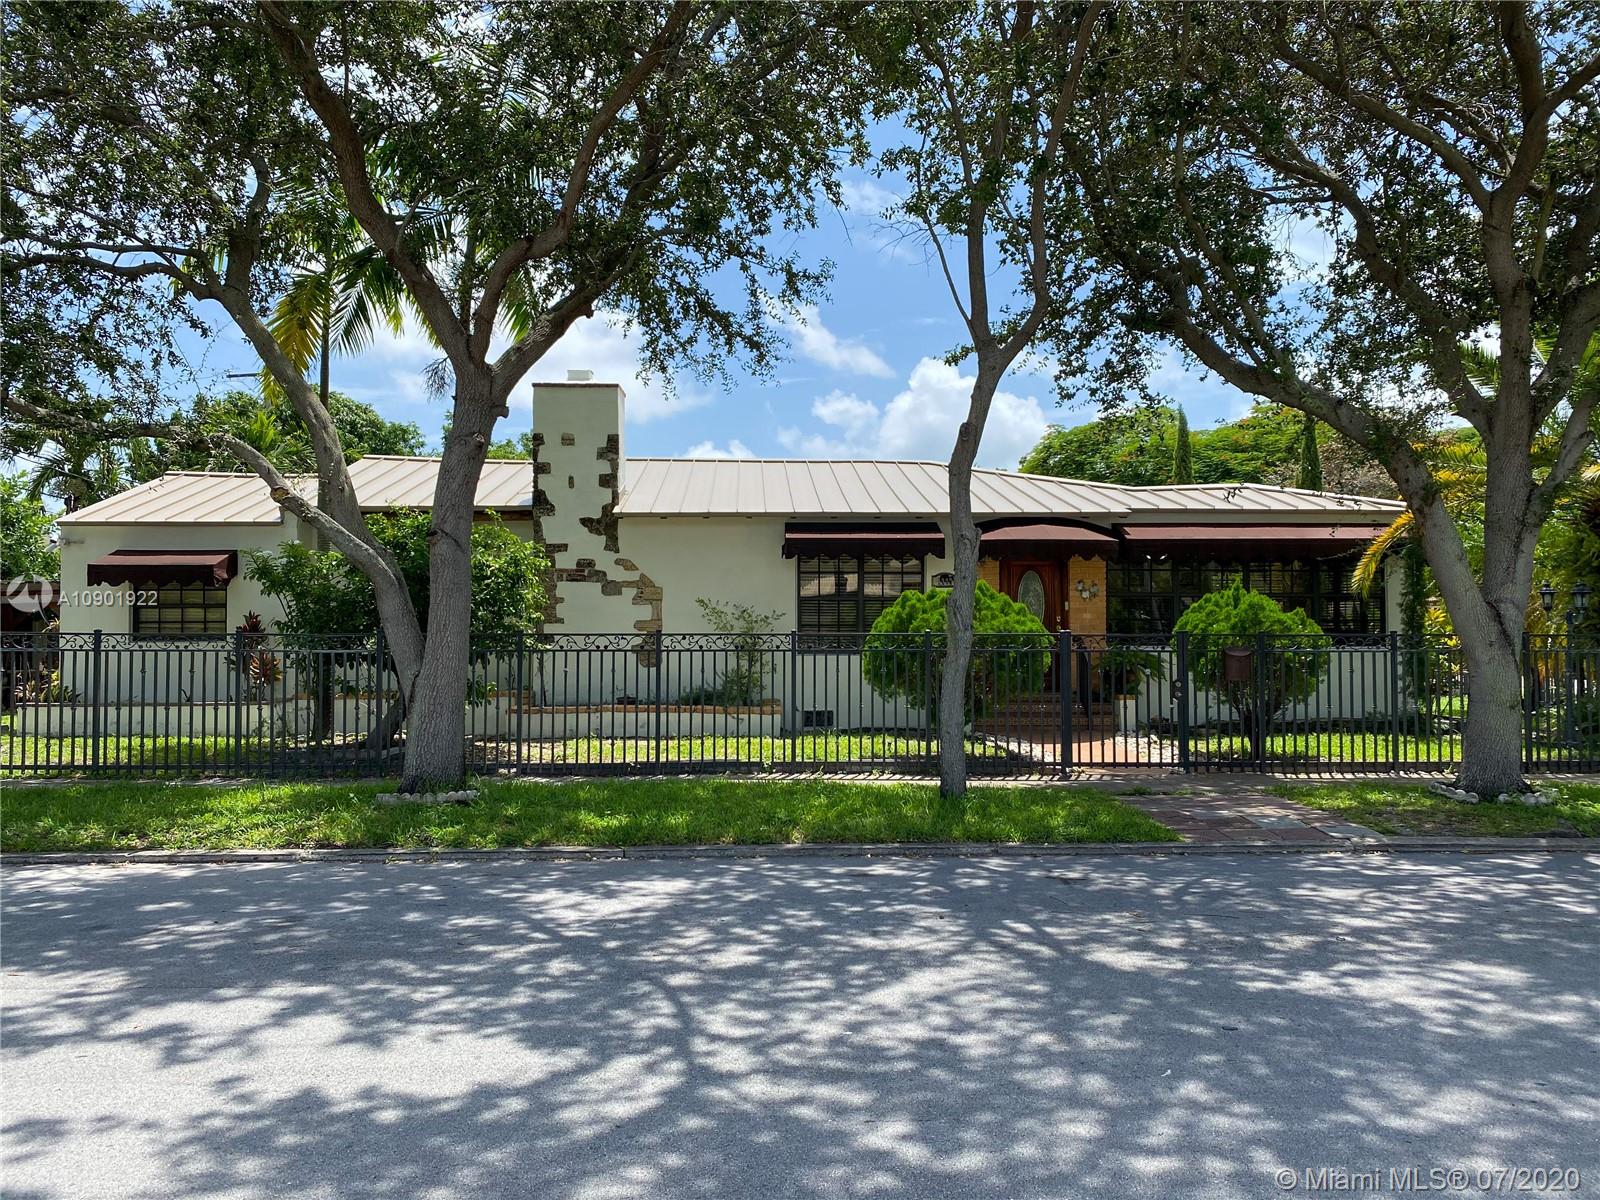 Photo 1 of 1449 18th Ave in Miami - MLS A10901922